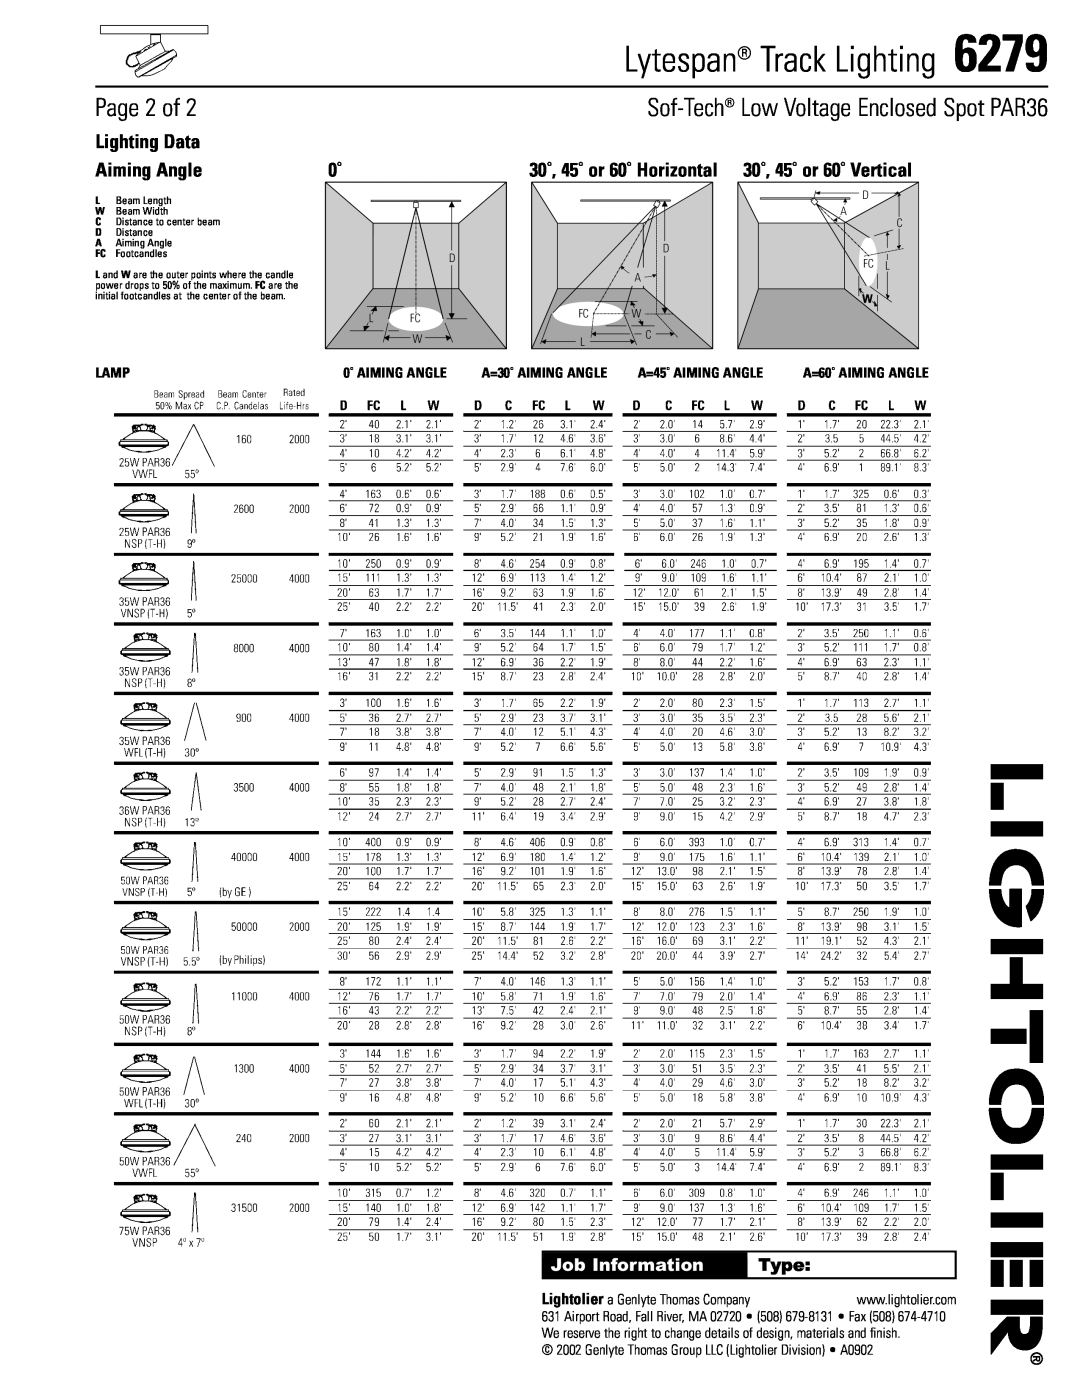 Lightolier 6279 manual Page 2 of, Sof-Tech Low Voltage Enclosed Spot PAR36, Lighting Data Aiming Angle, Type, Lamp 